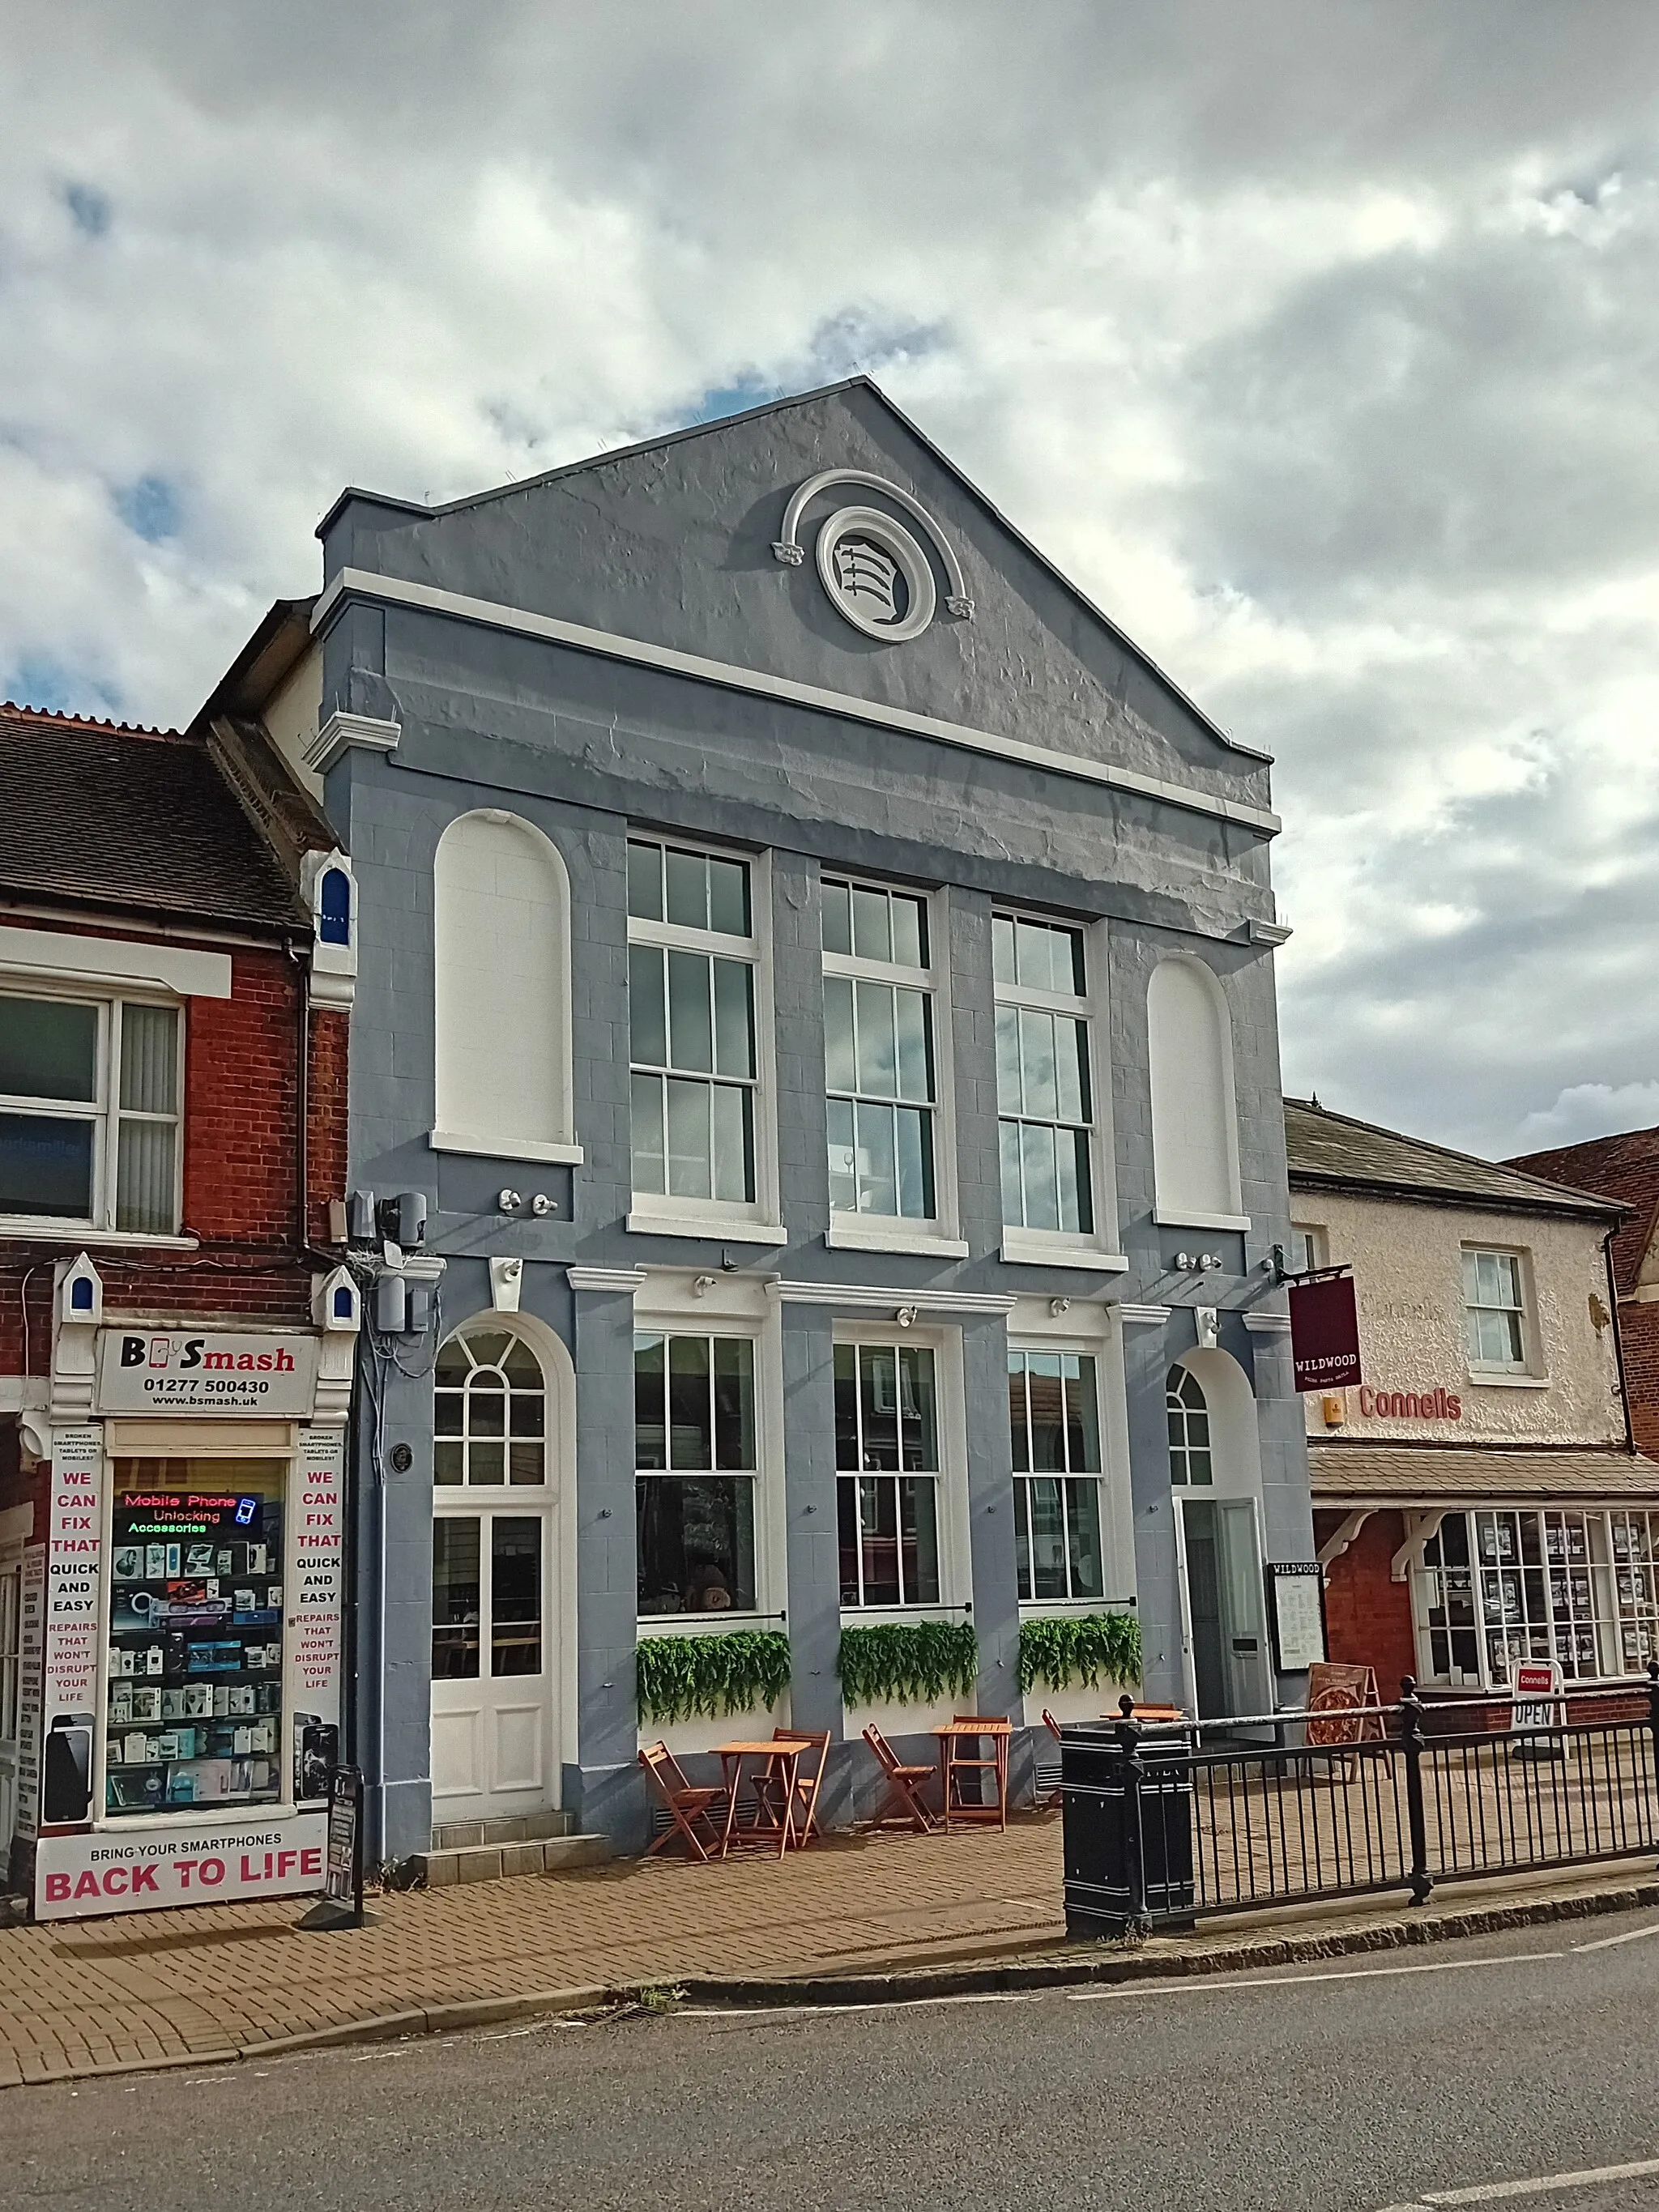 Photo showing: Built 1830 as market hall and public assembly rooms, also served as police station 1904-1938 and council chamber for Billericay Urban District Council 1938-1955. Converted to a restaurant around 1999.